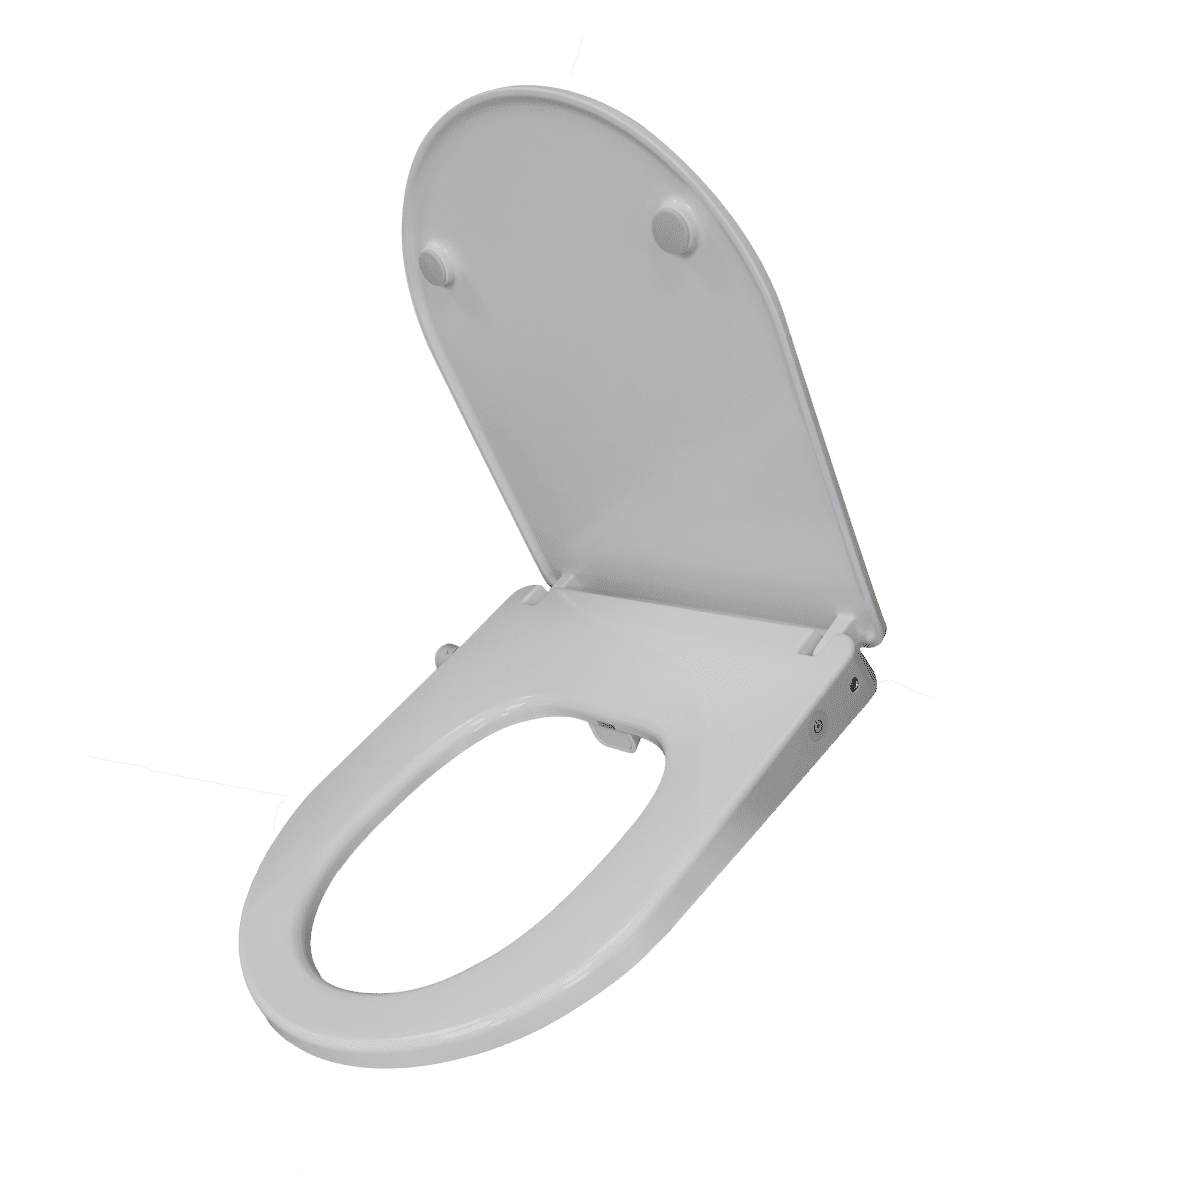 Electric Bidet Toilet Seat With Self-Cleaning Dual Nozzle